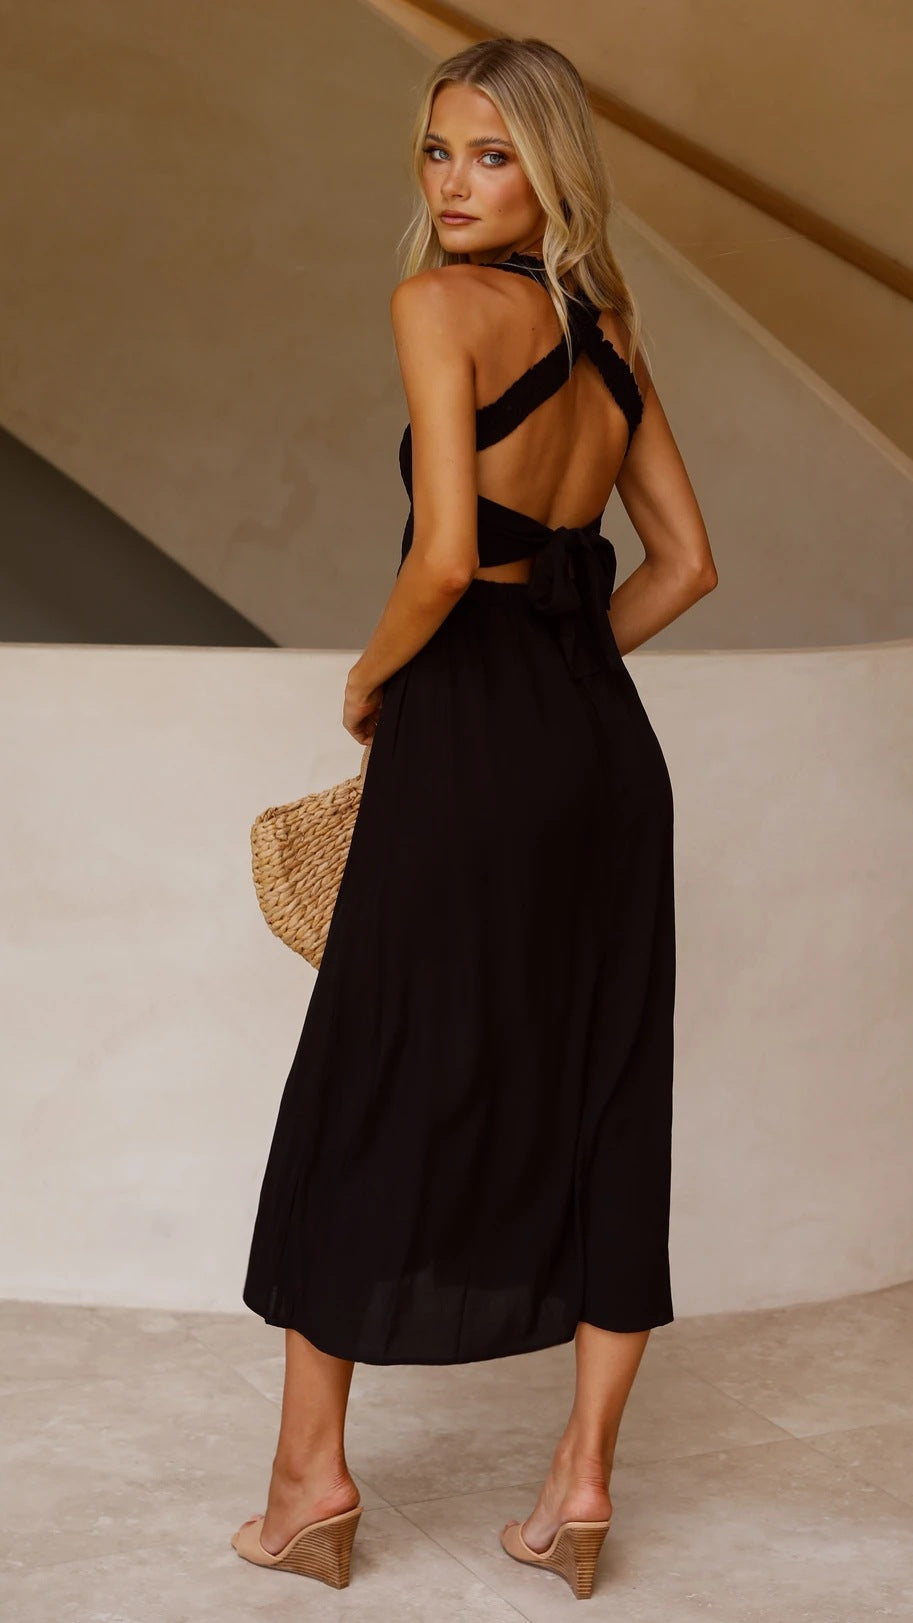 Chic Square Neck Solid Color Maxi Dress with Waist Belt